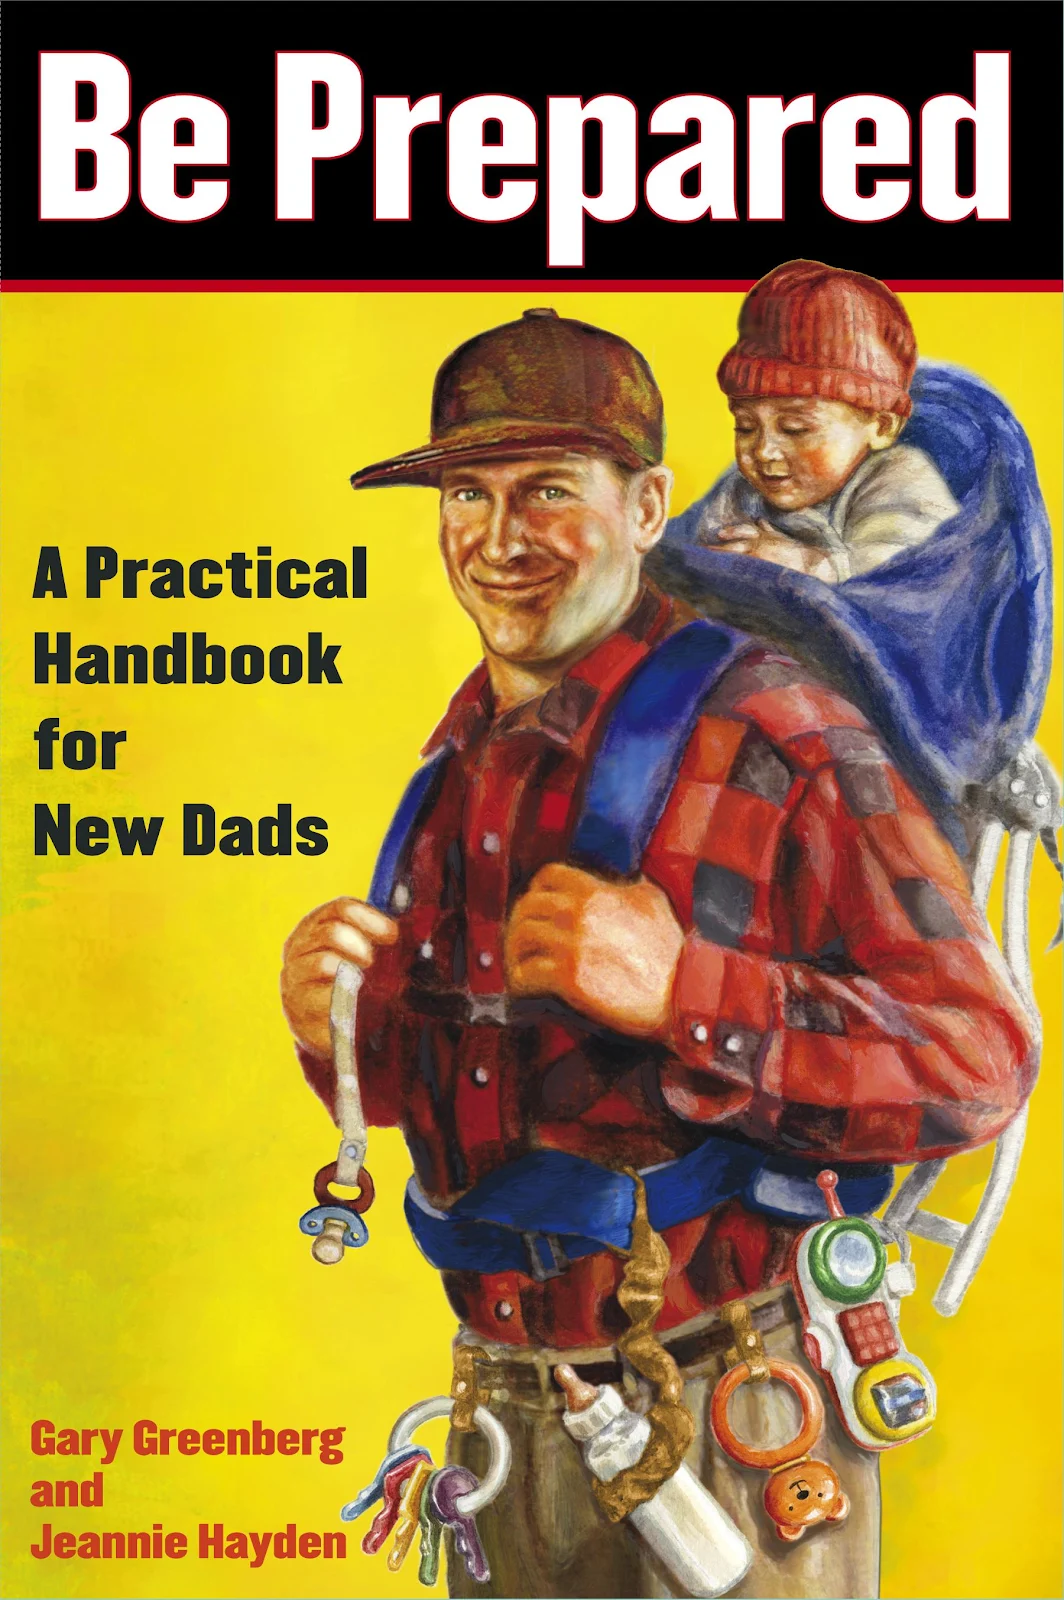 A Practical Handbook for New Dads